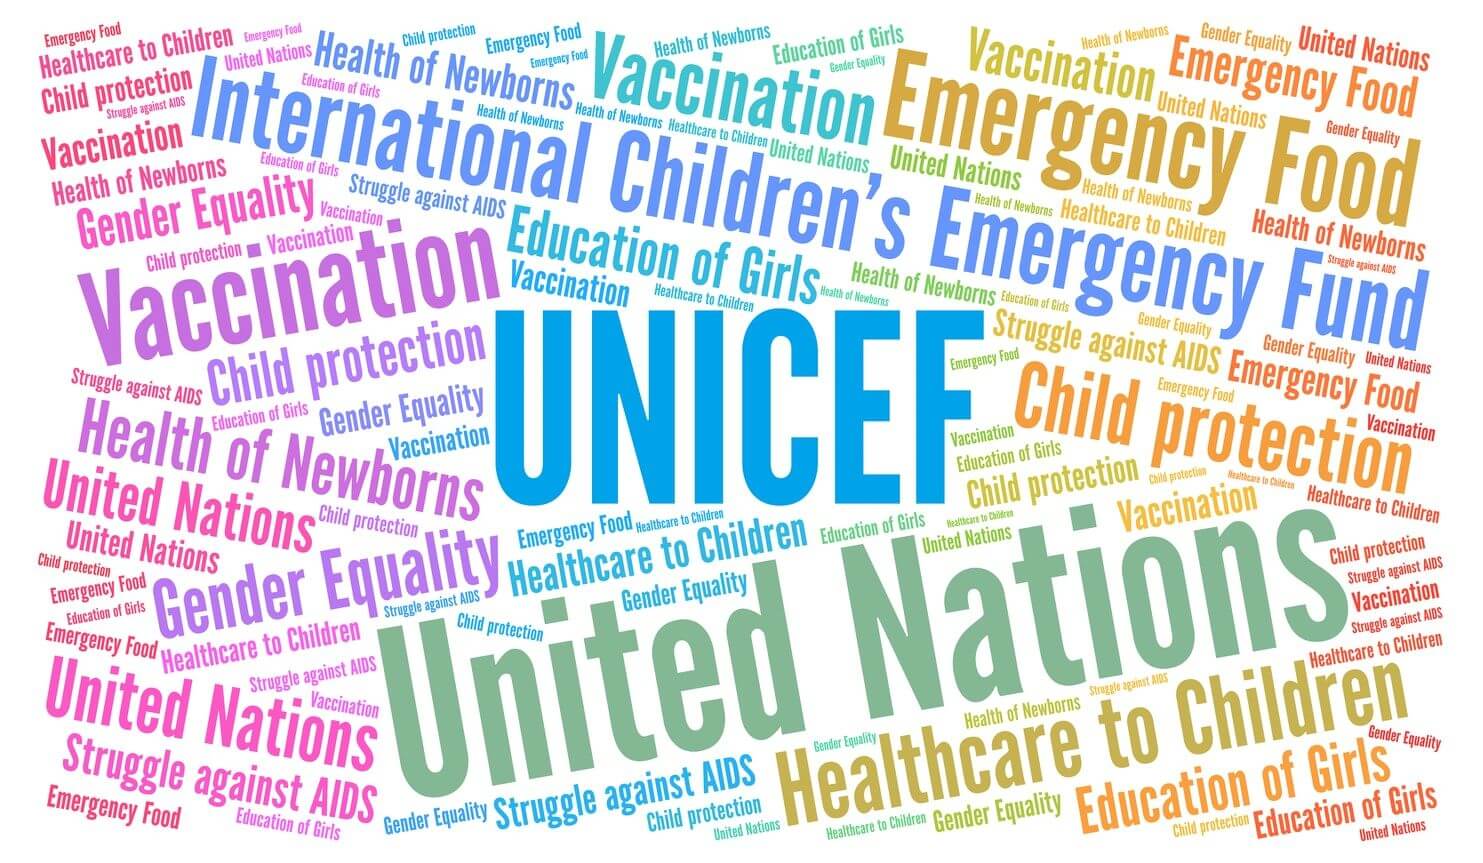 The UNICEF cryptocurrency fund supports good causes